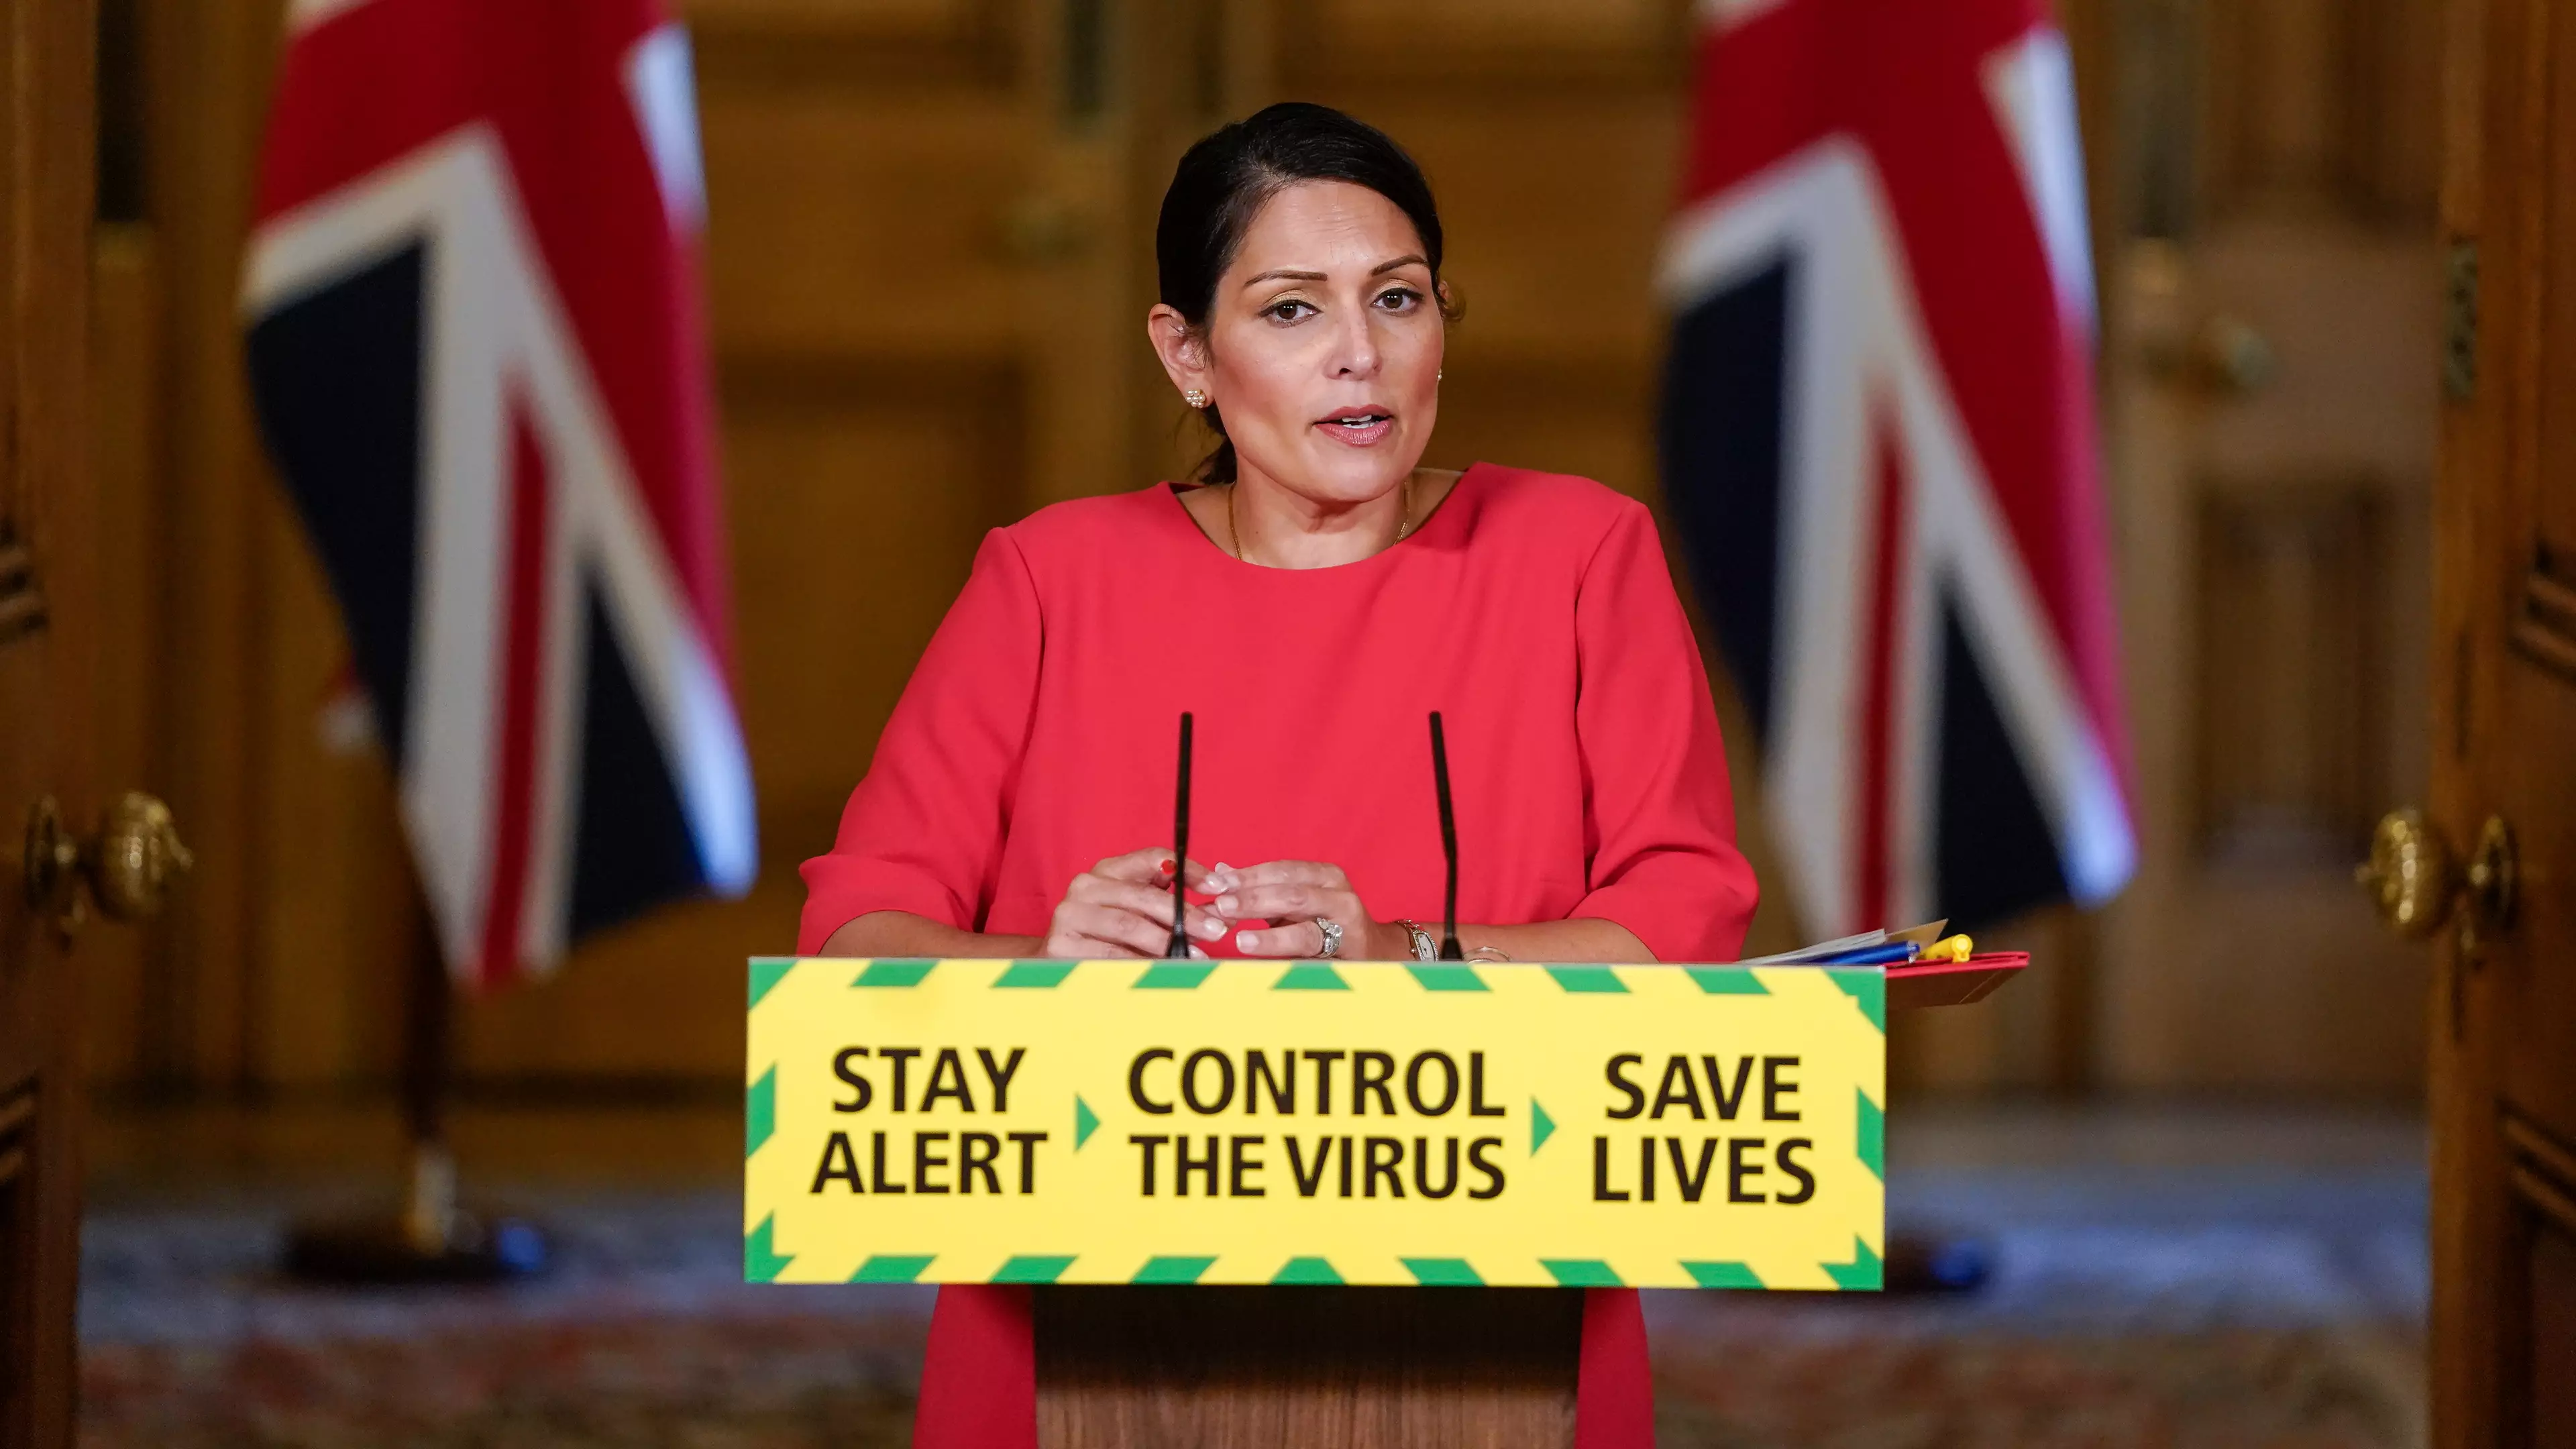 Priti Patel Confirms Sitting On Park Benches is Banned Under New Lockdown Rules